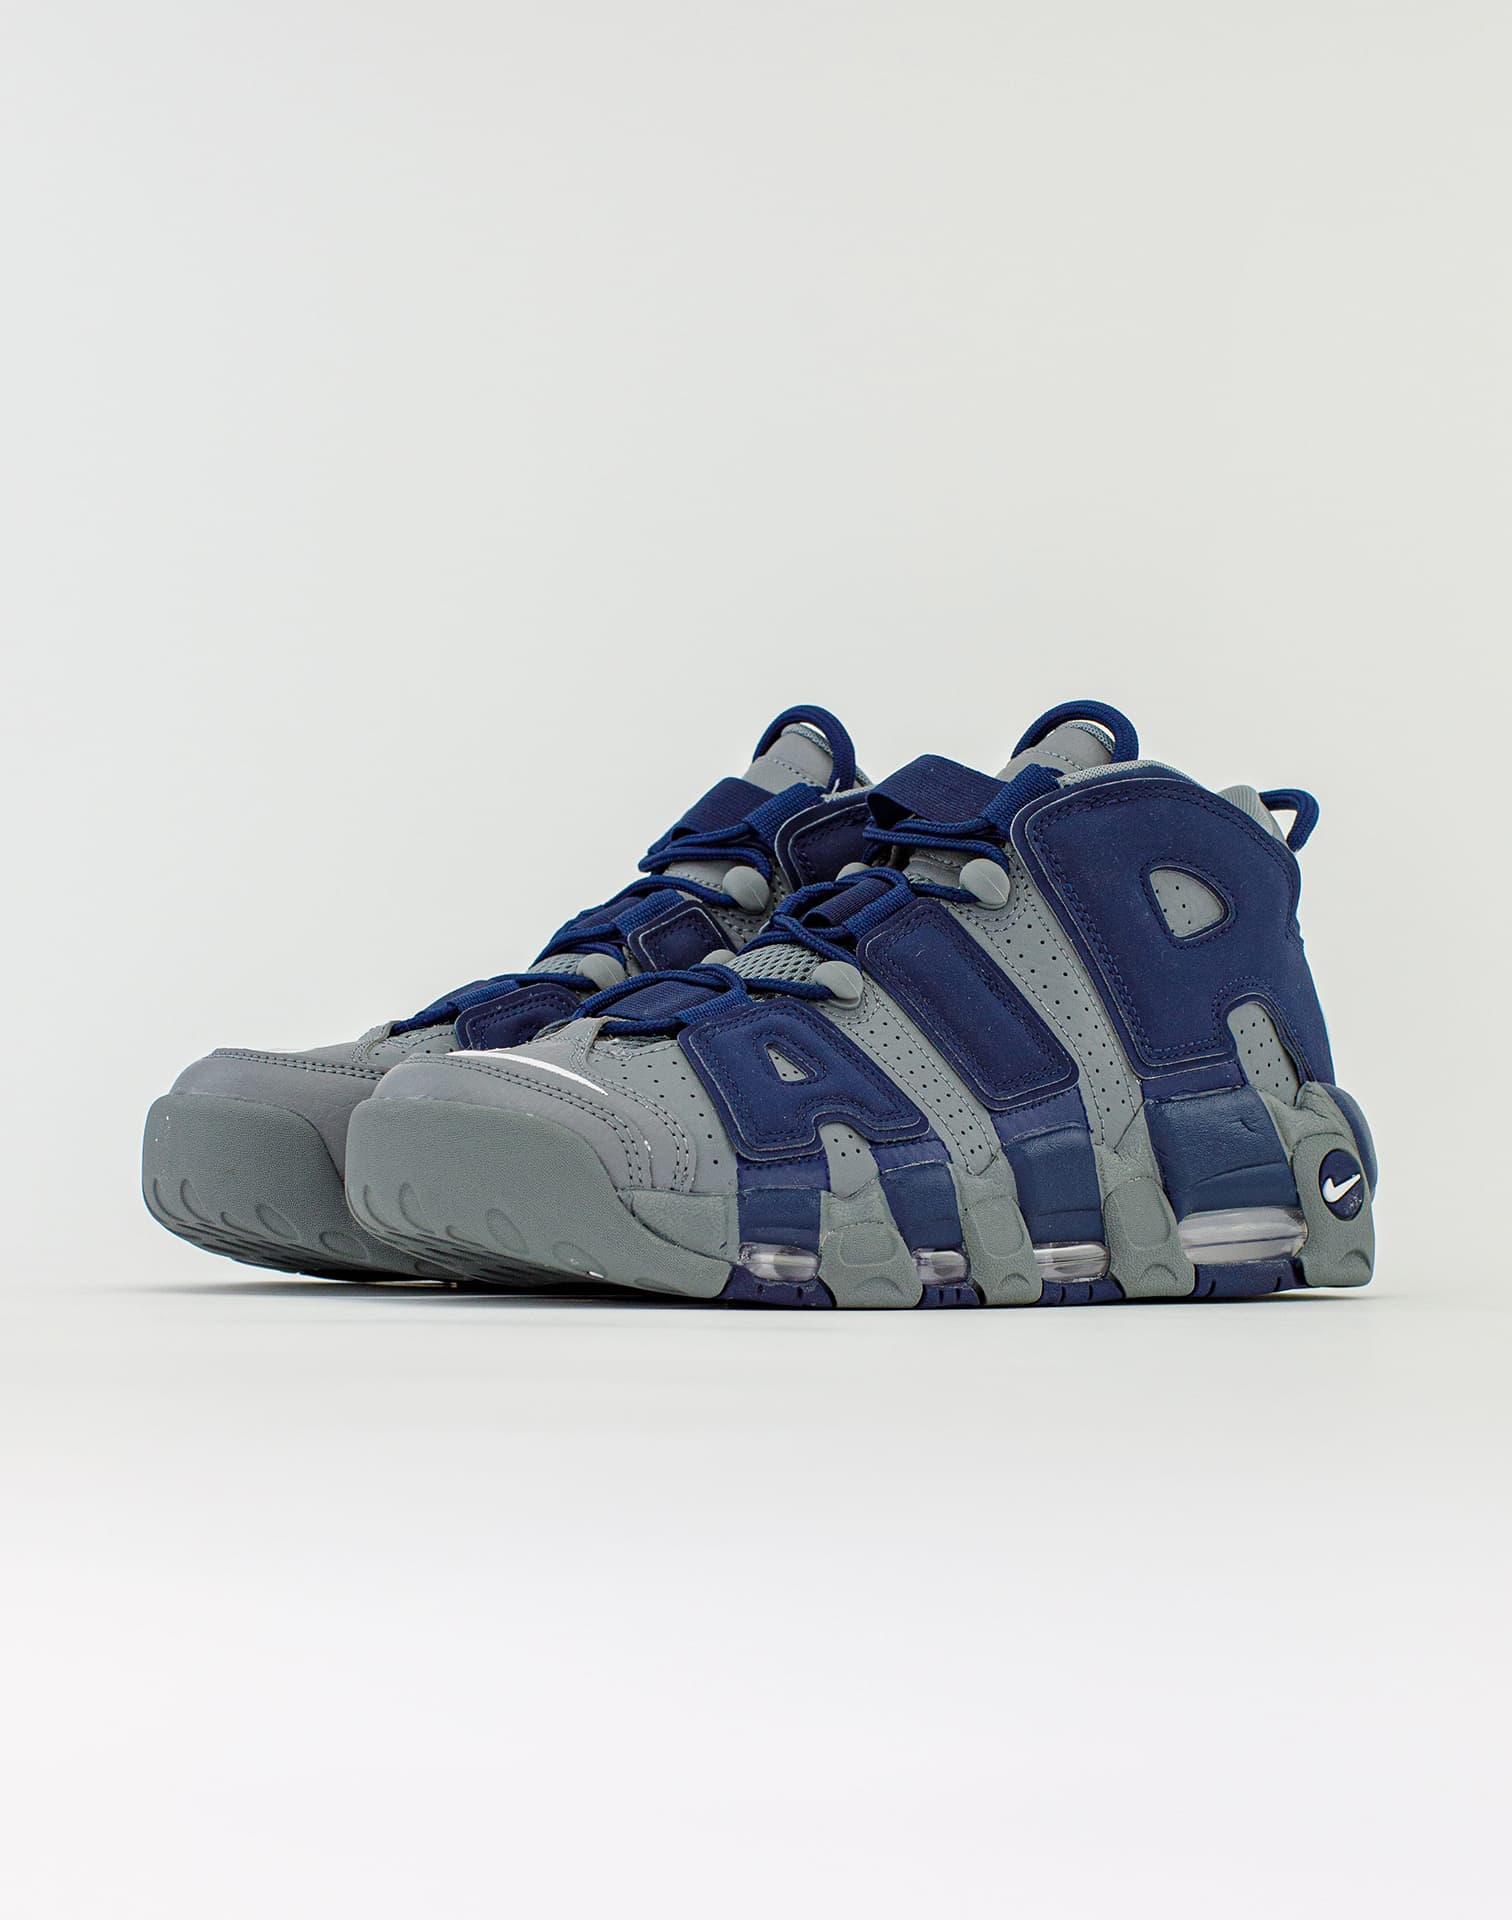 NIKE AIR MORE UPTEMPO “96 – SW3 London